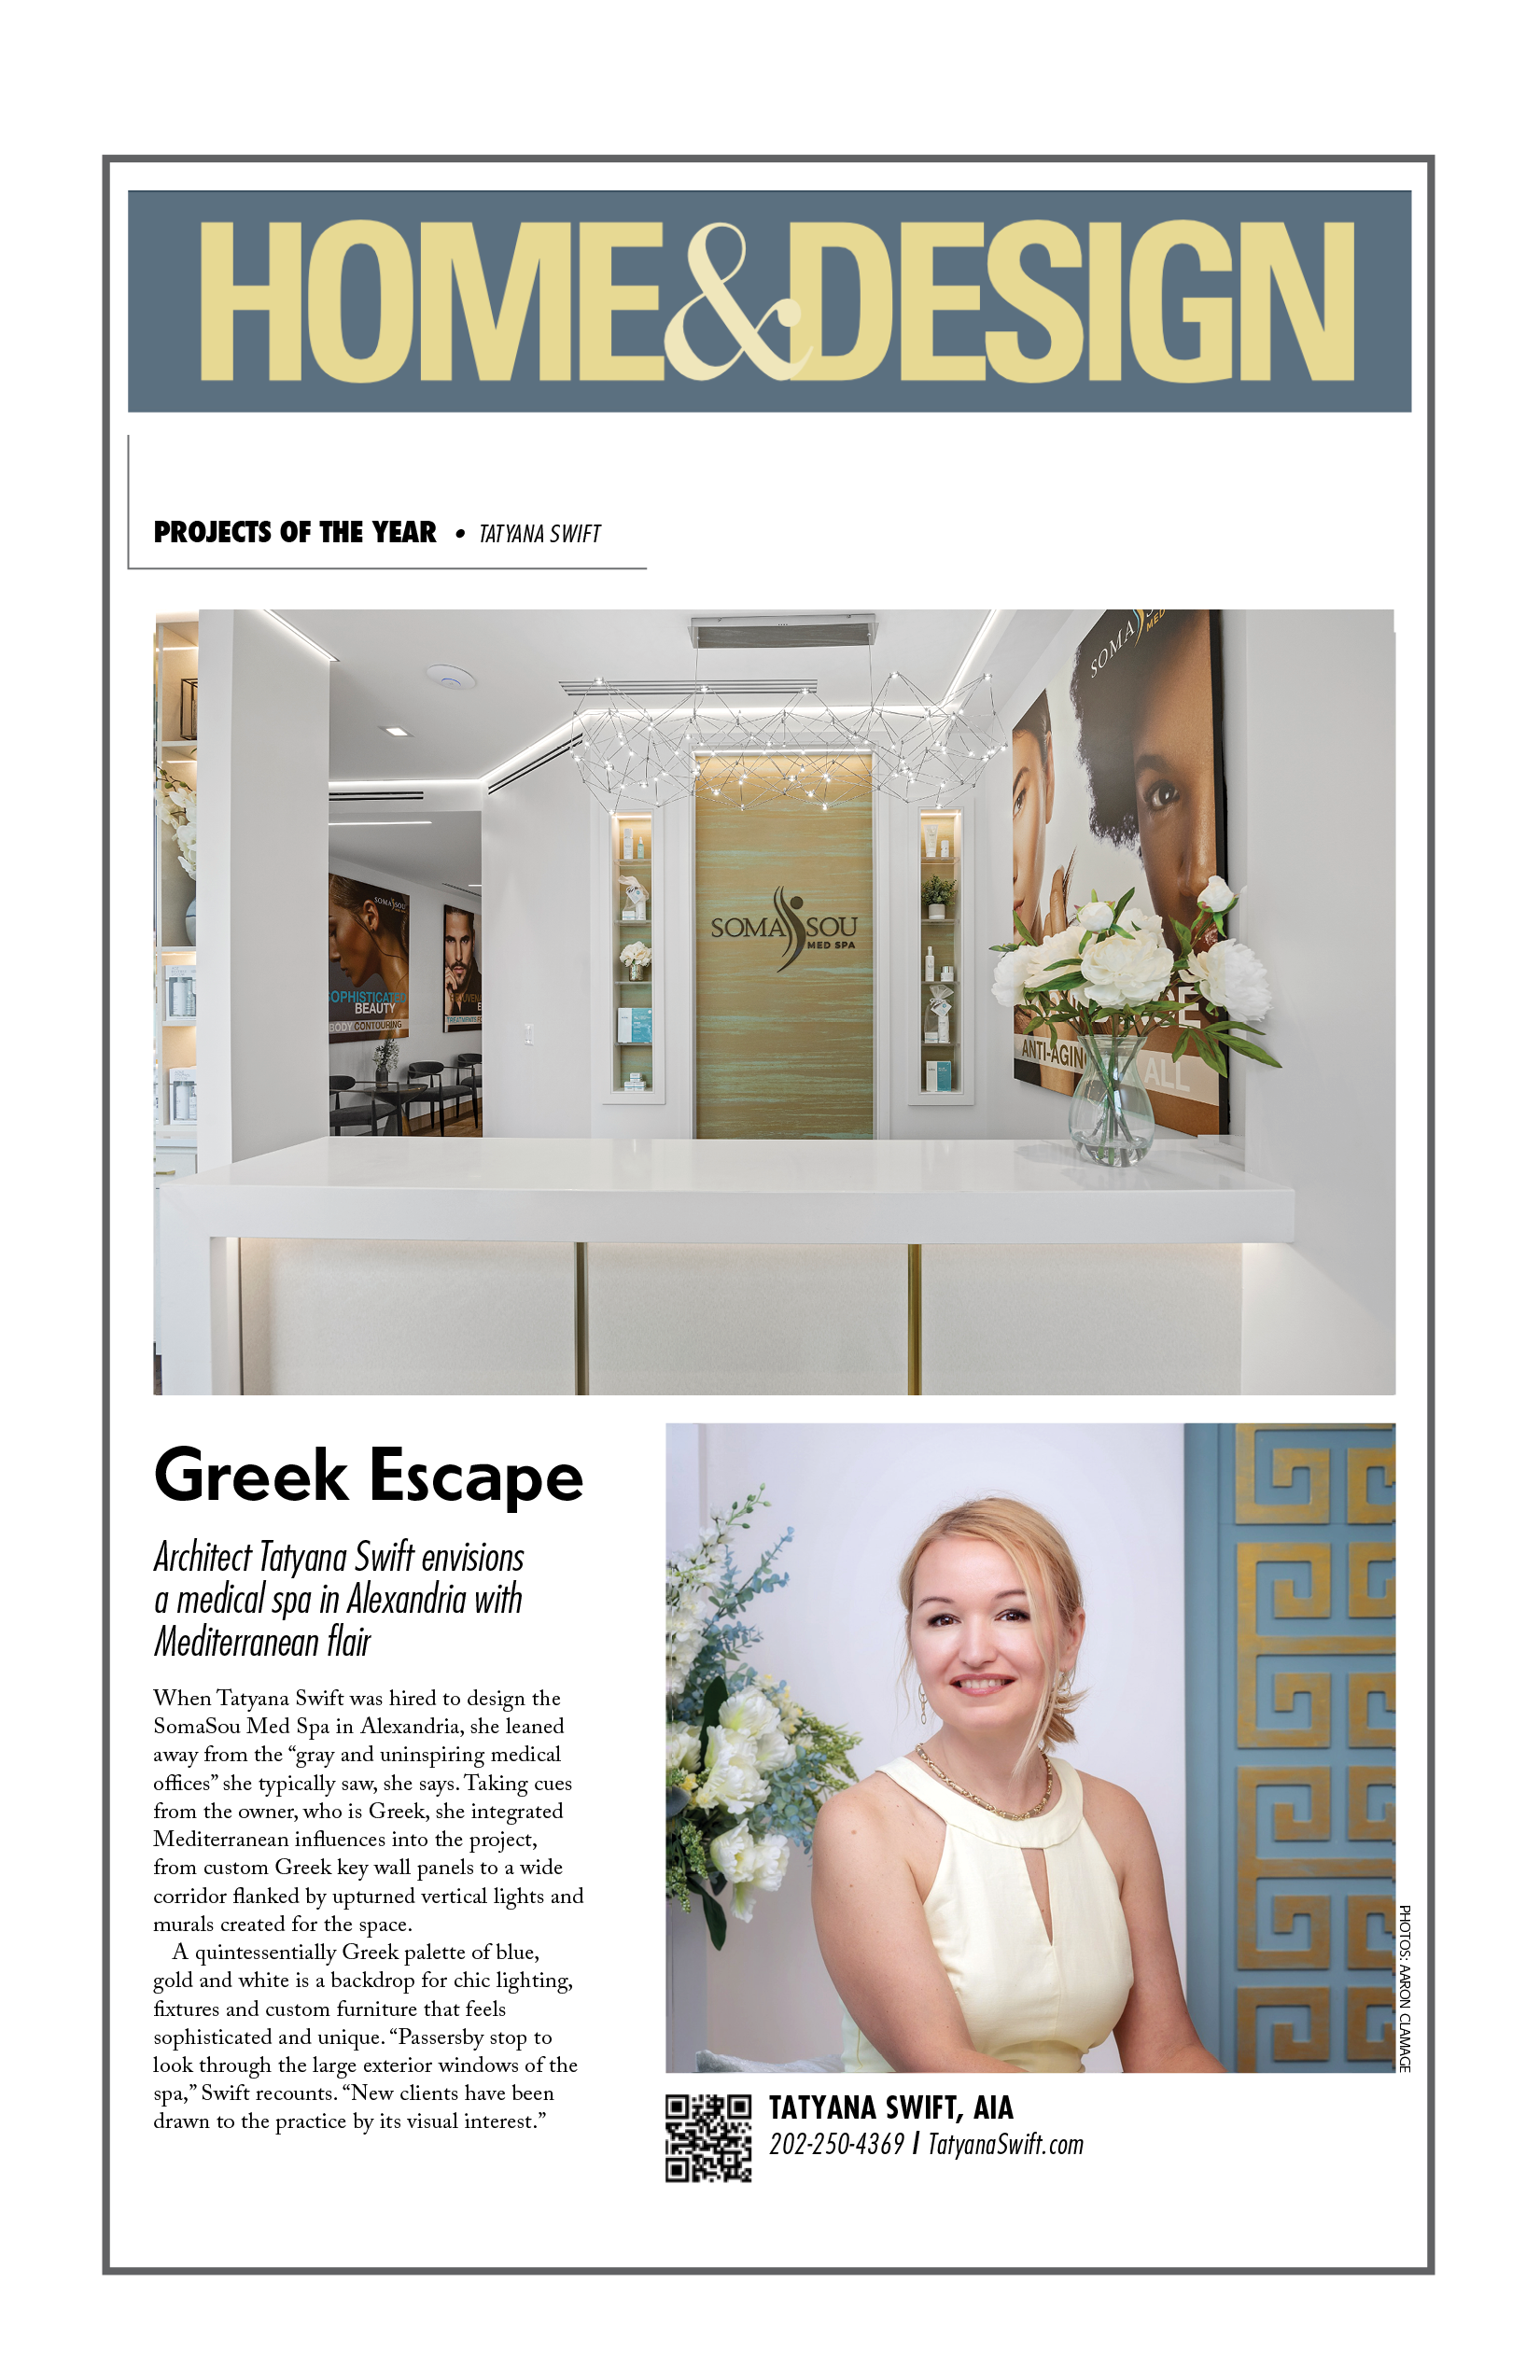 Home & Design Magazine features SomaSou Medspa Project by Tatyana Swift